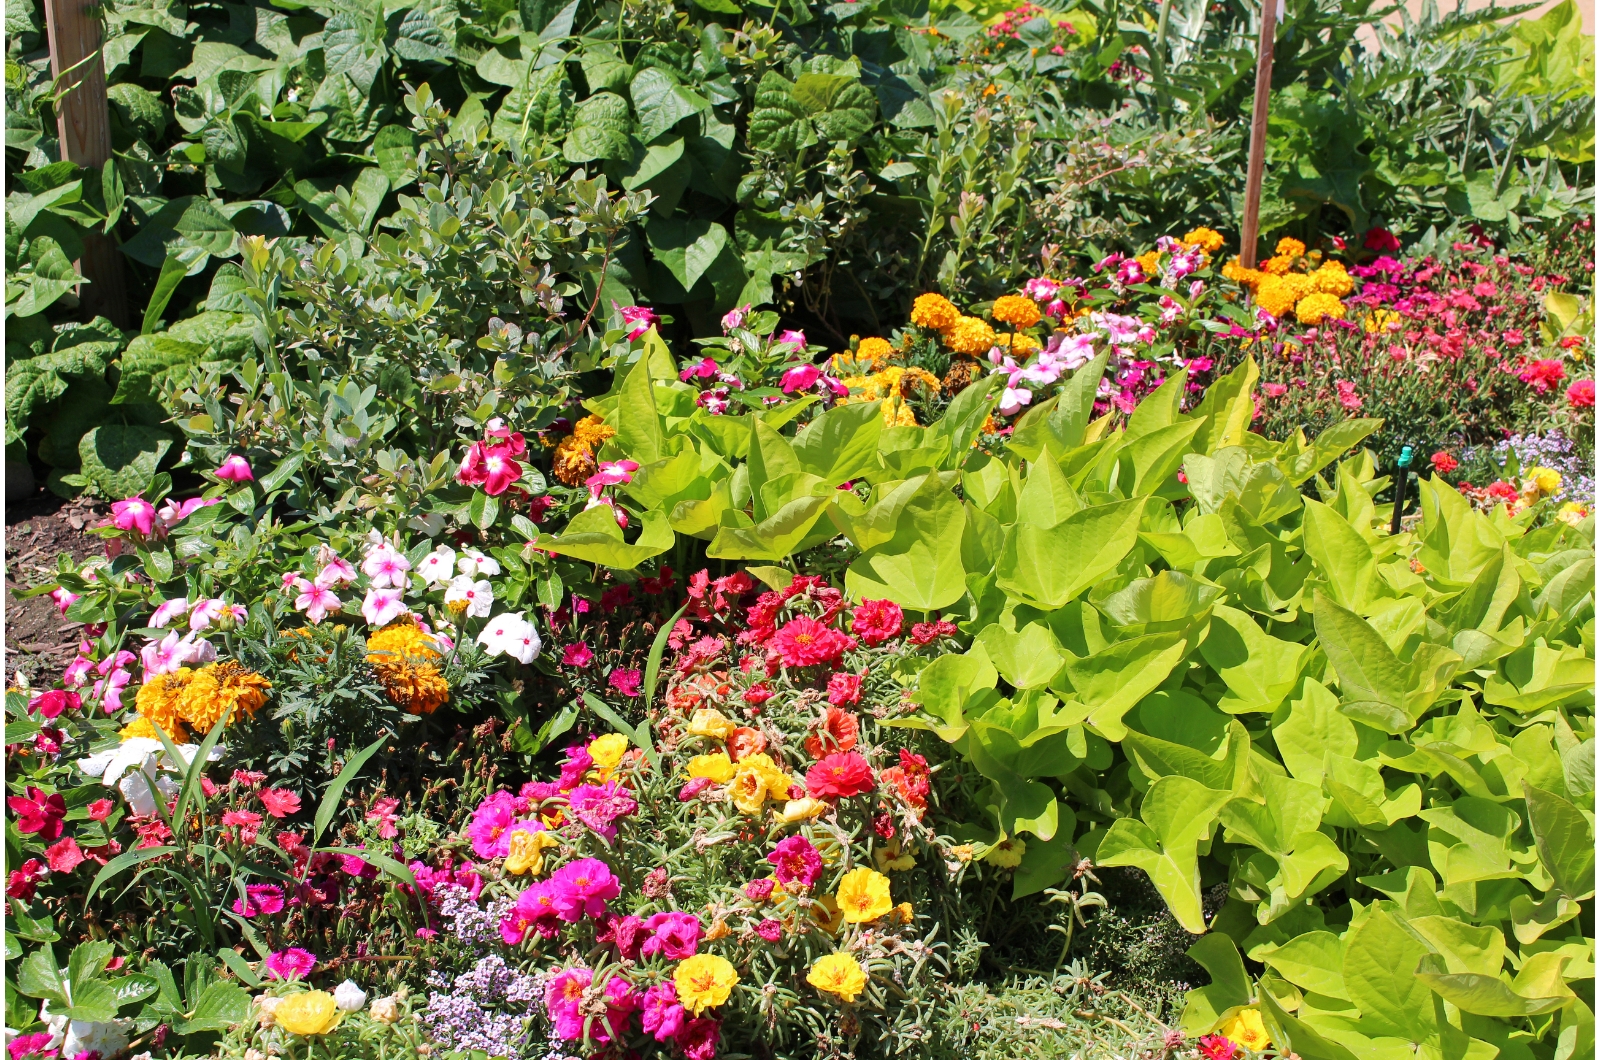 flowers and vegetables in a garden